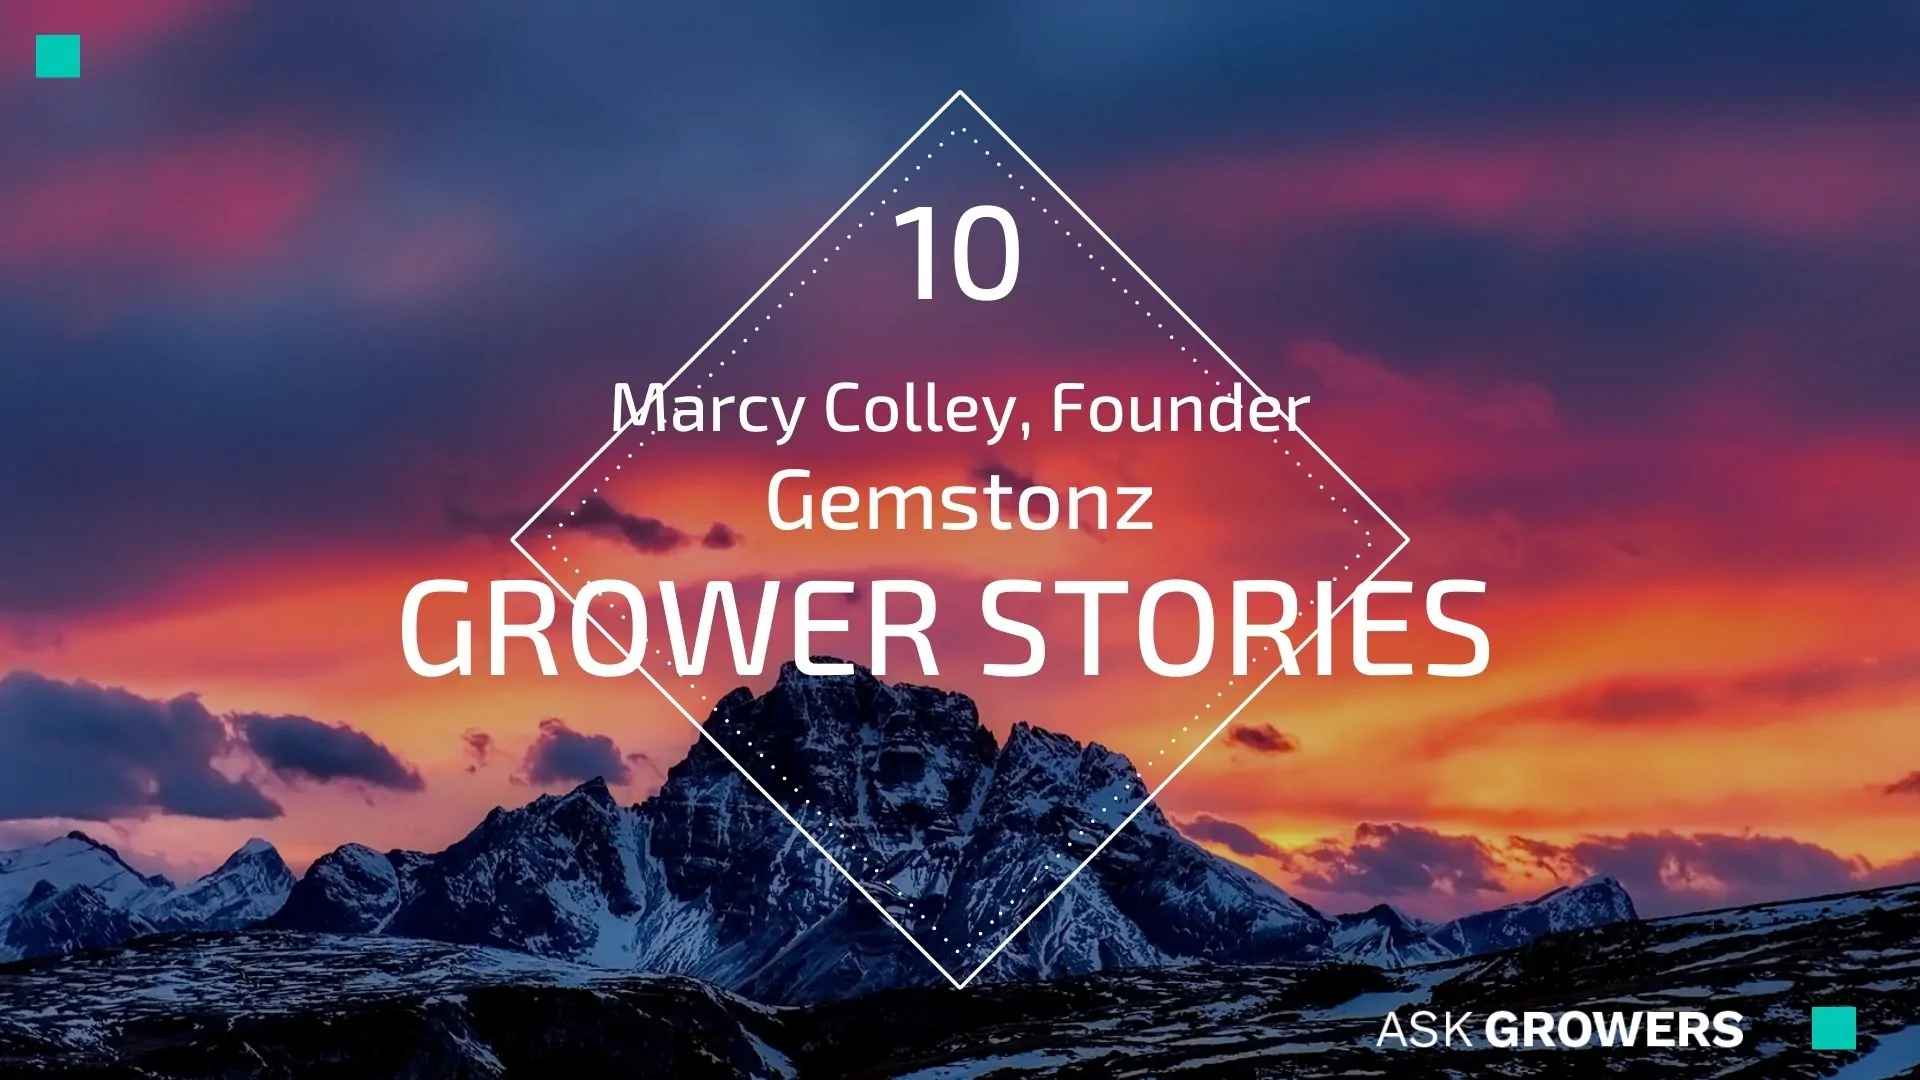 Grower Stories #10: Marcy Colley